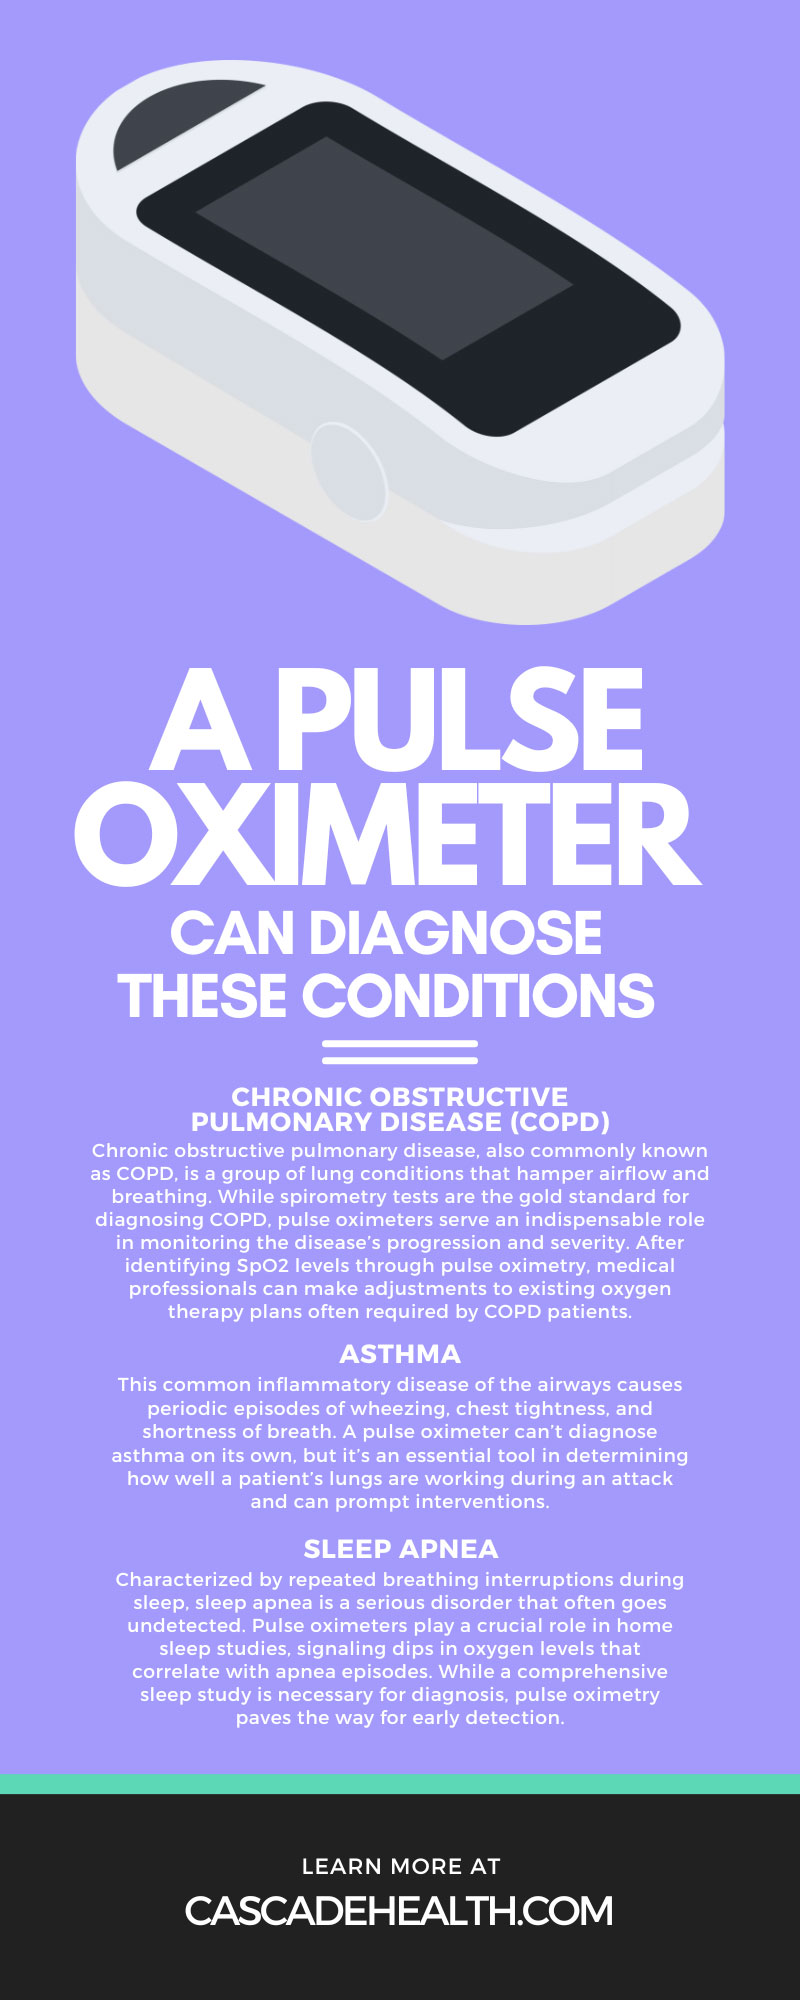 A Pulse Oximeter Can Diagnose These 5 Conditions